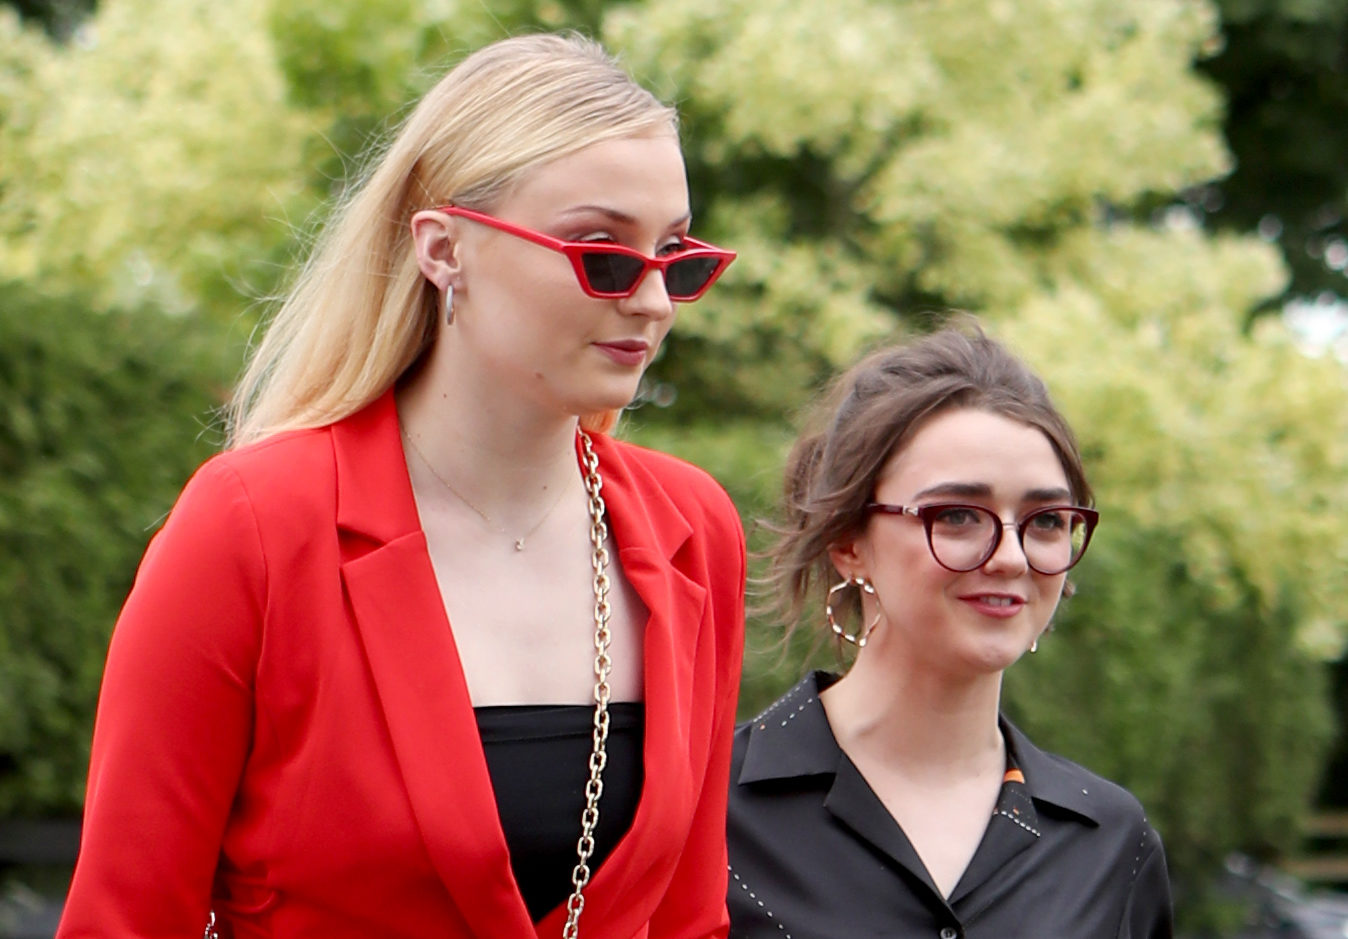 Actresses Sophie Turner (left) and Maisie Williams arrive at the wedding (Jane Barlow/PA Wire)